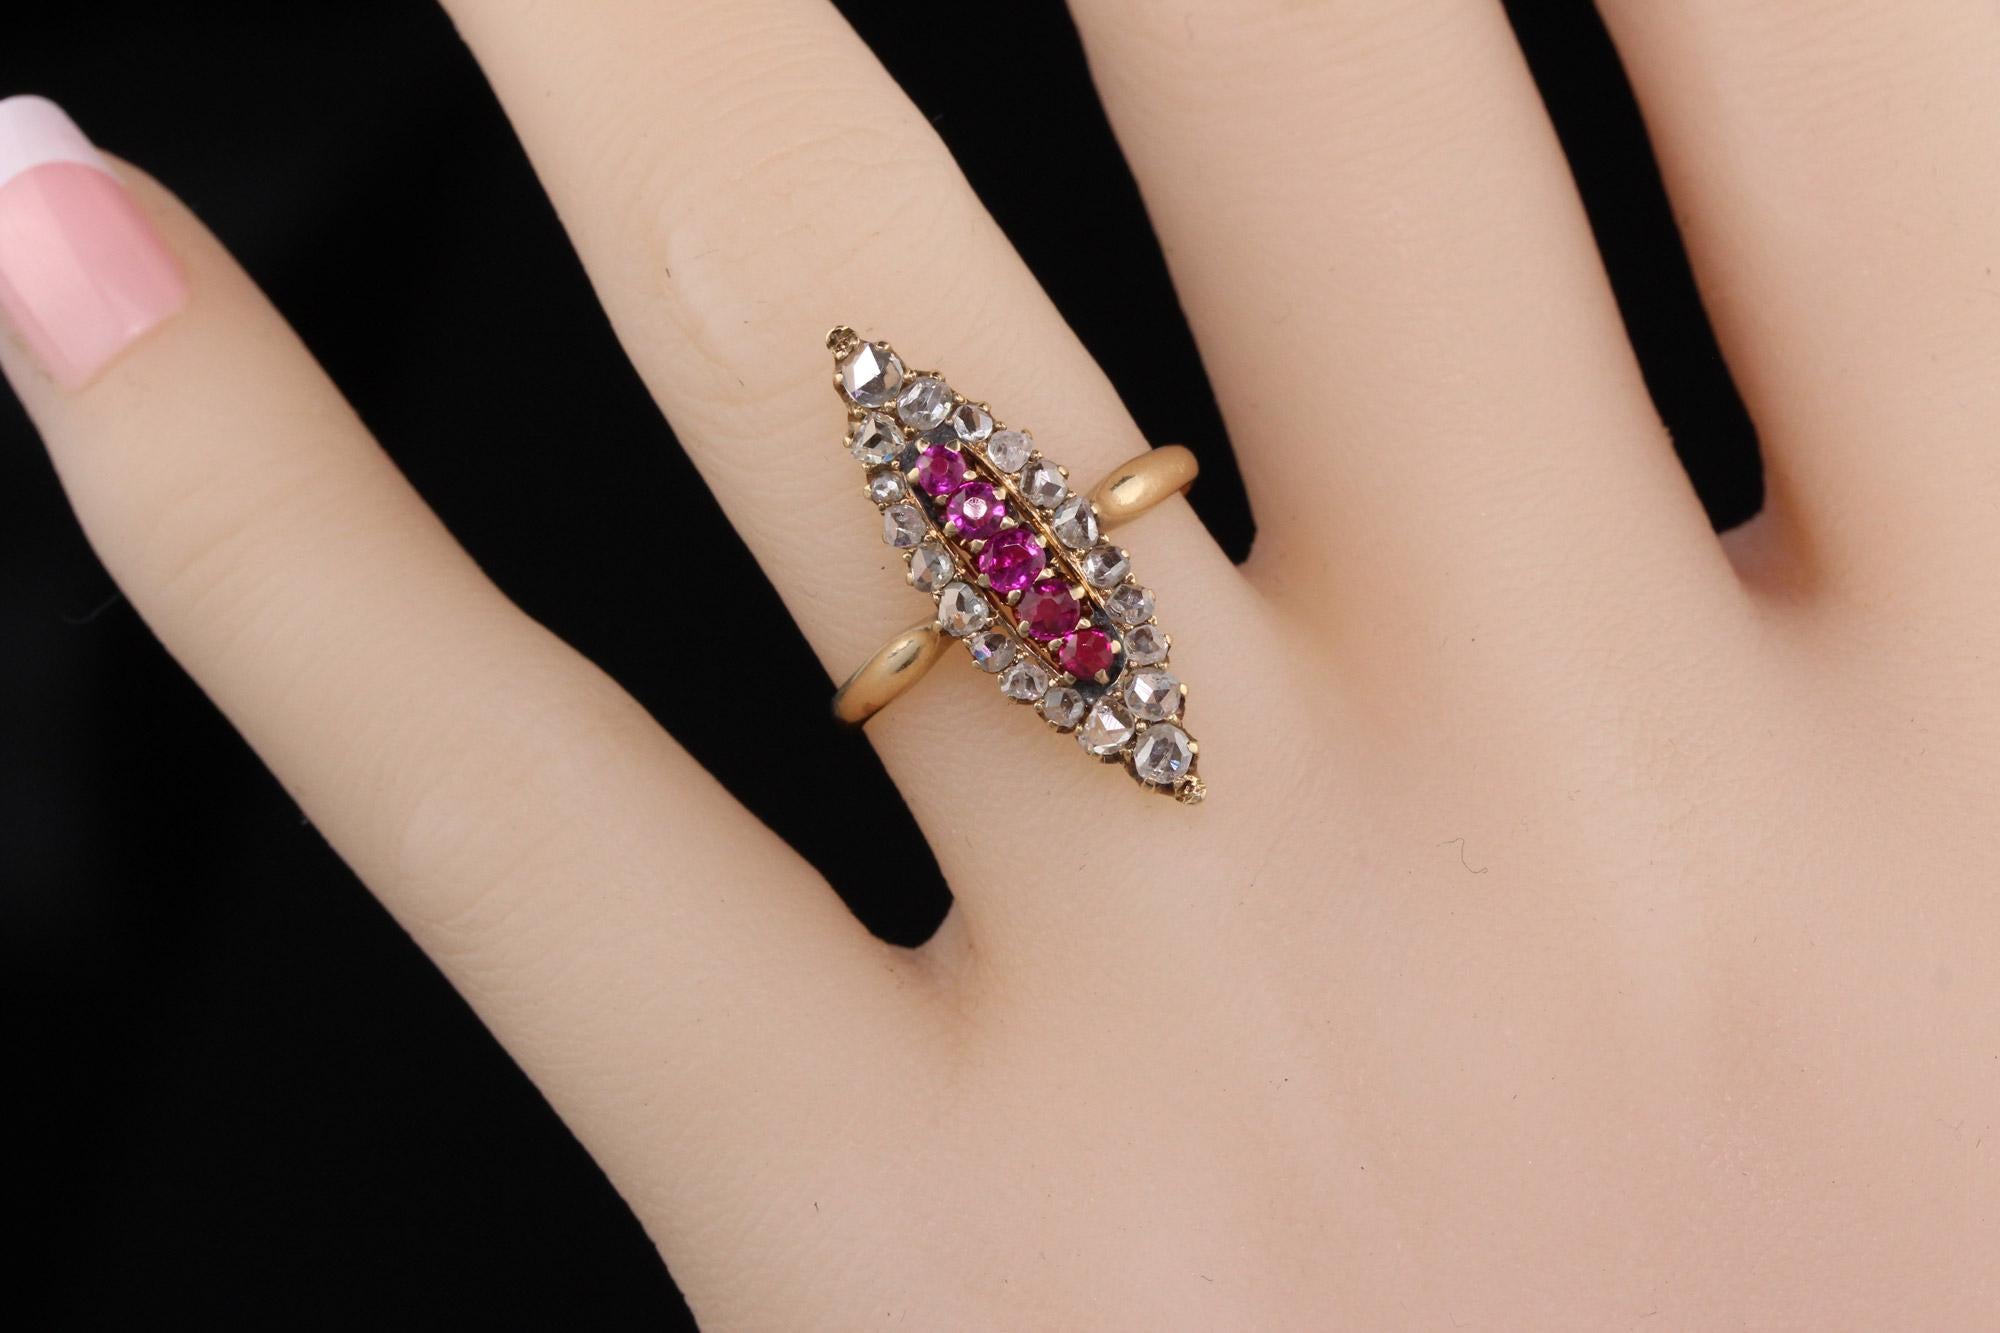 Antique Victorian 14 Karat Yellow Gold, Rose Cut Diamond and Ruby Navette Ring 2